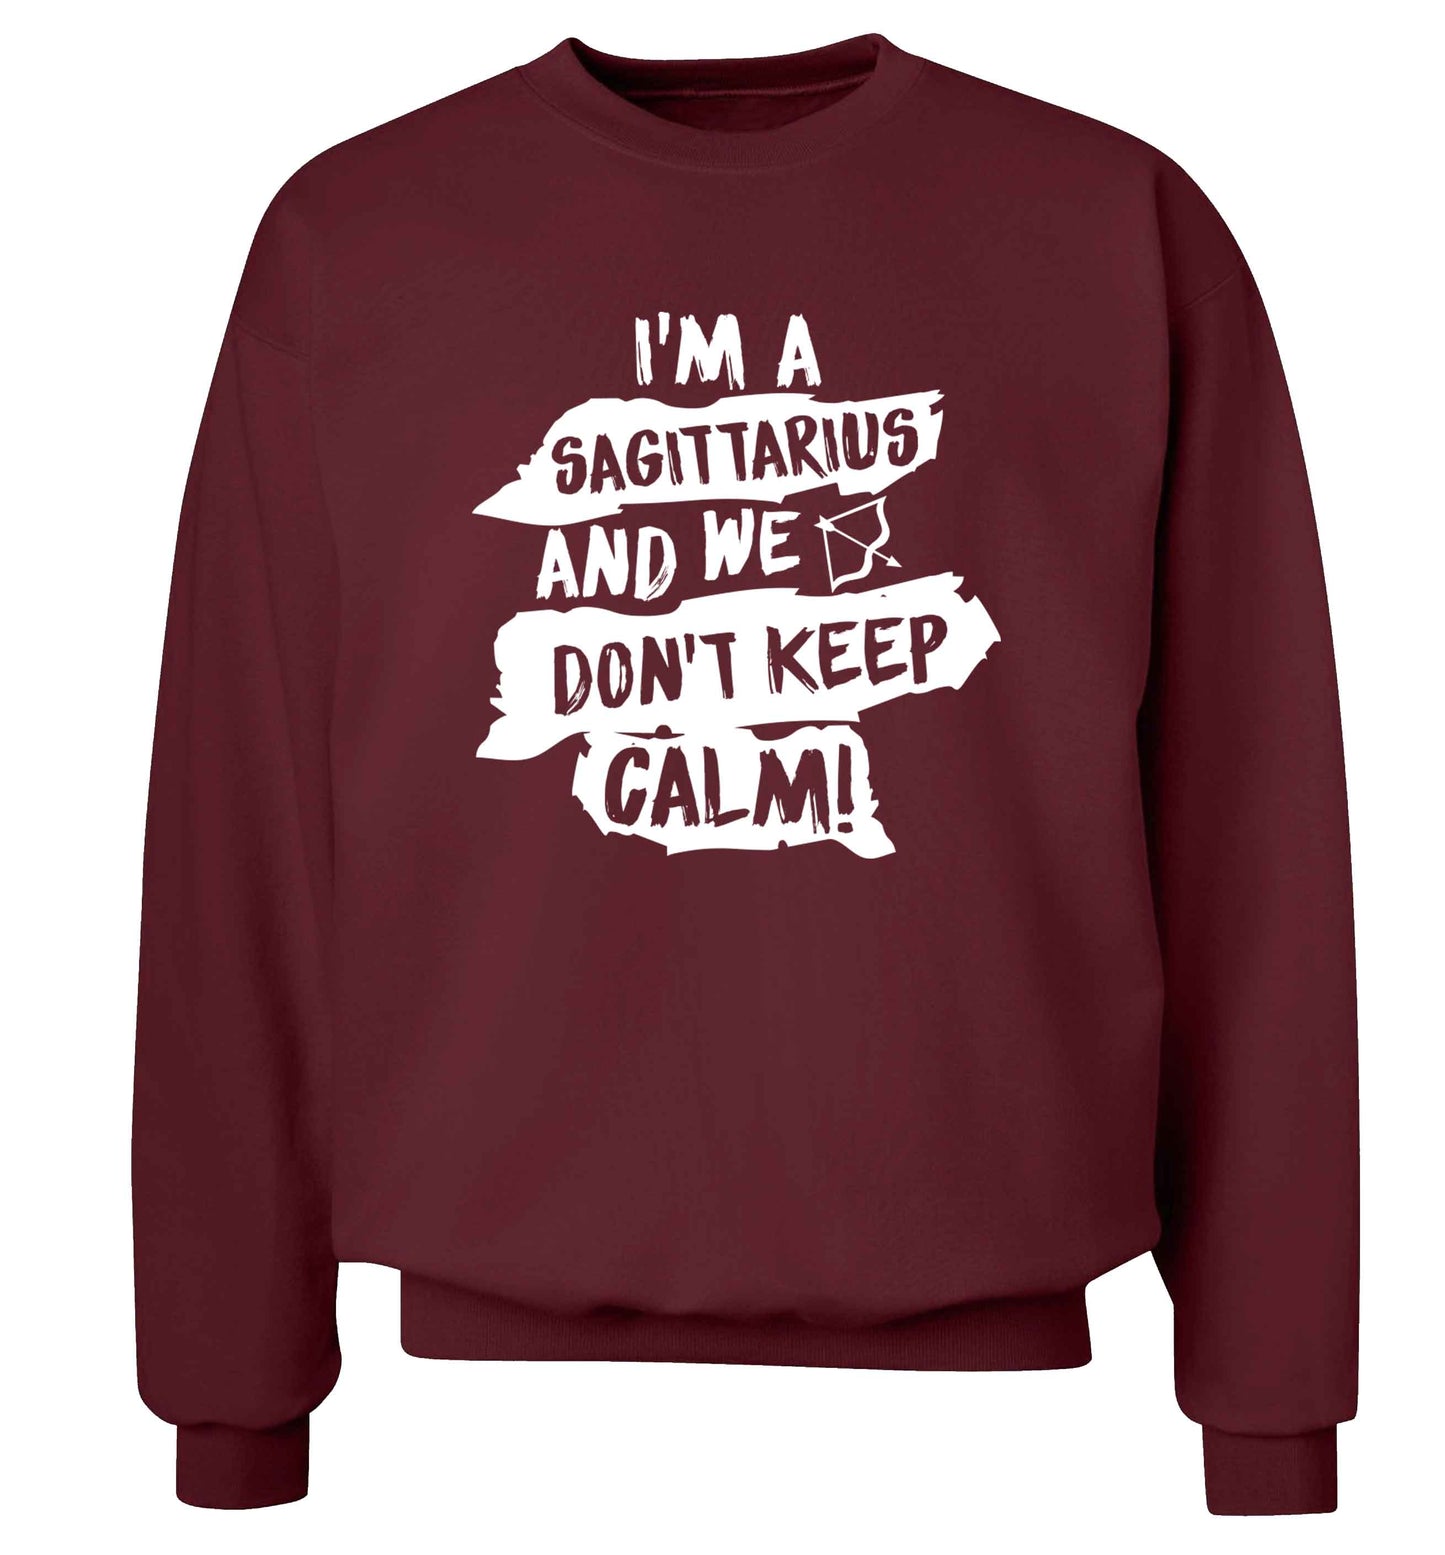 I'm a sagittarius and we don't keep calm Adult's unisex maroon Sweater 2XL